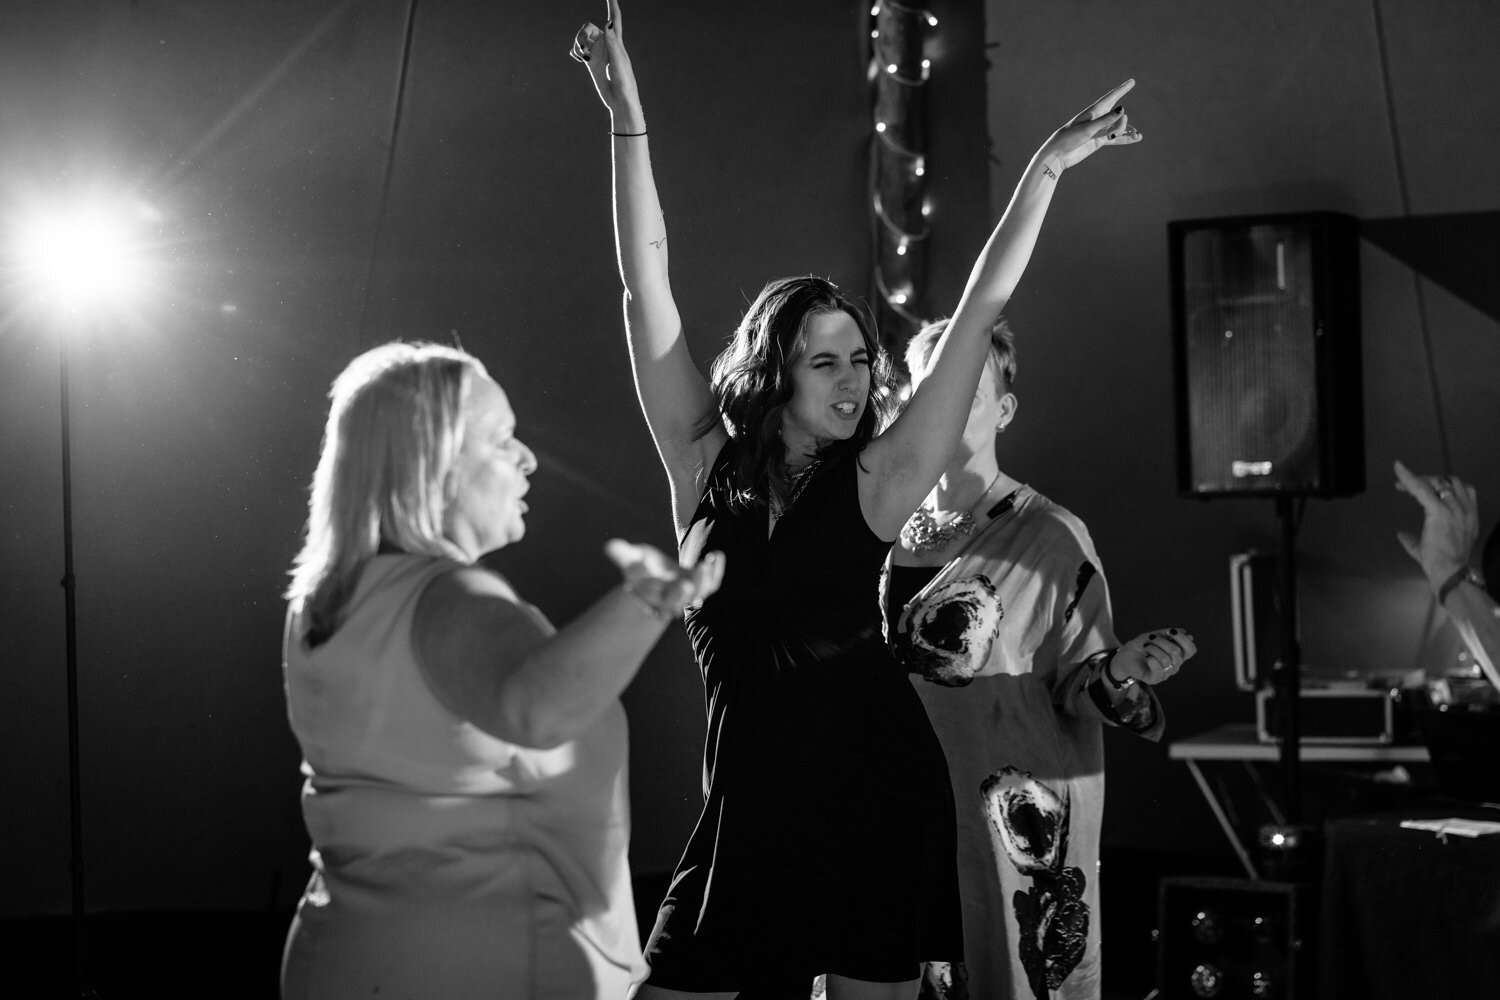 Guest dancing with arms in the air at wedding party